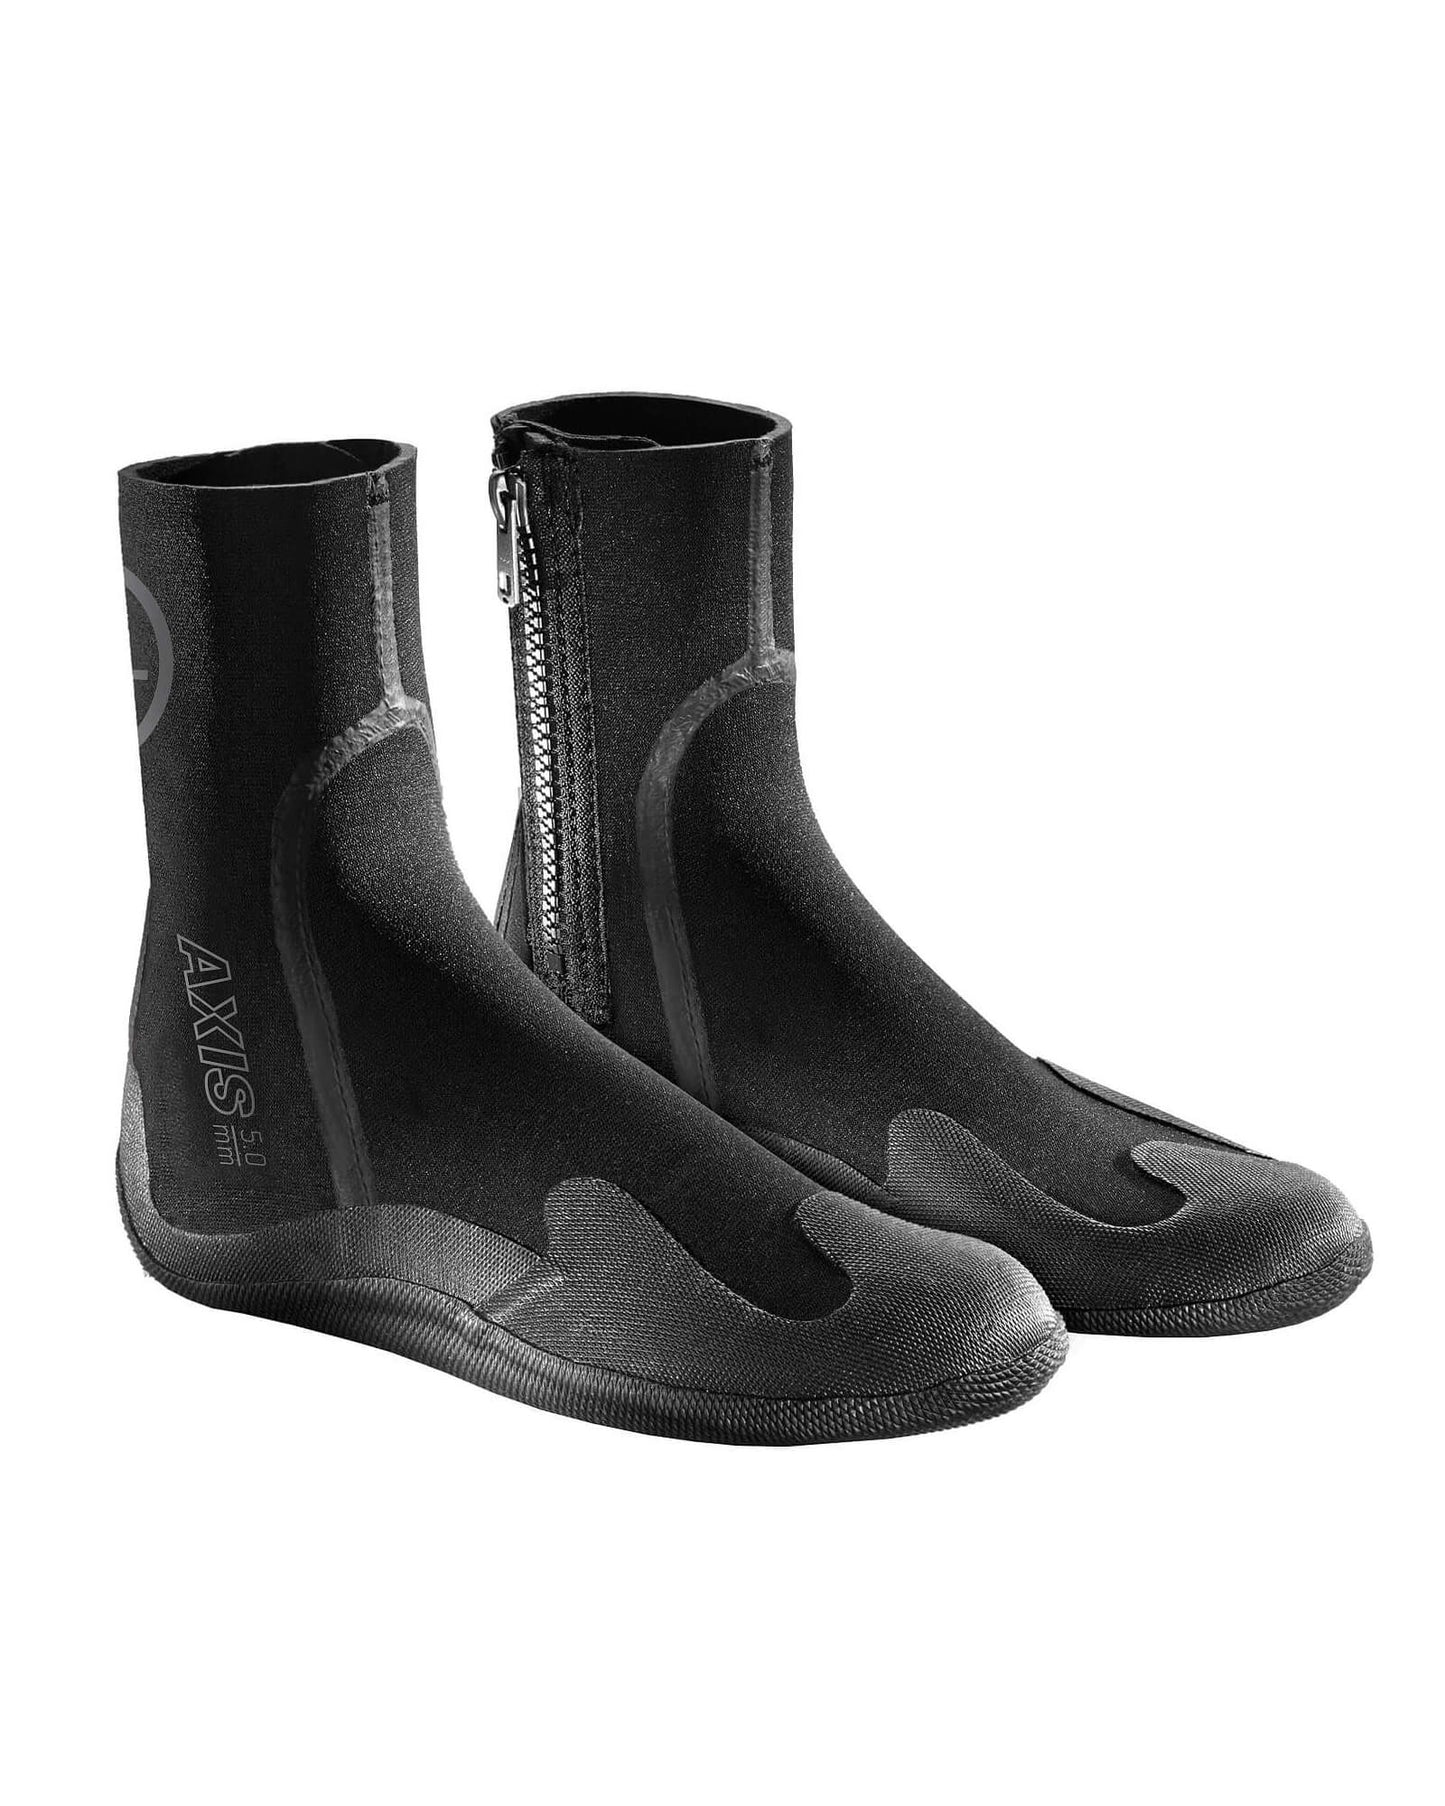 5mm Youth XCEL AXIS Round Toe Boots